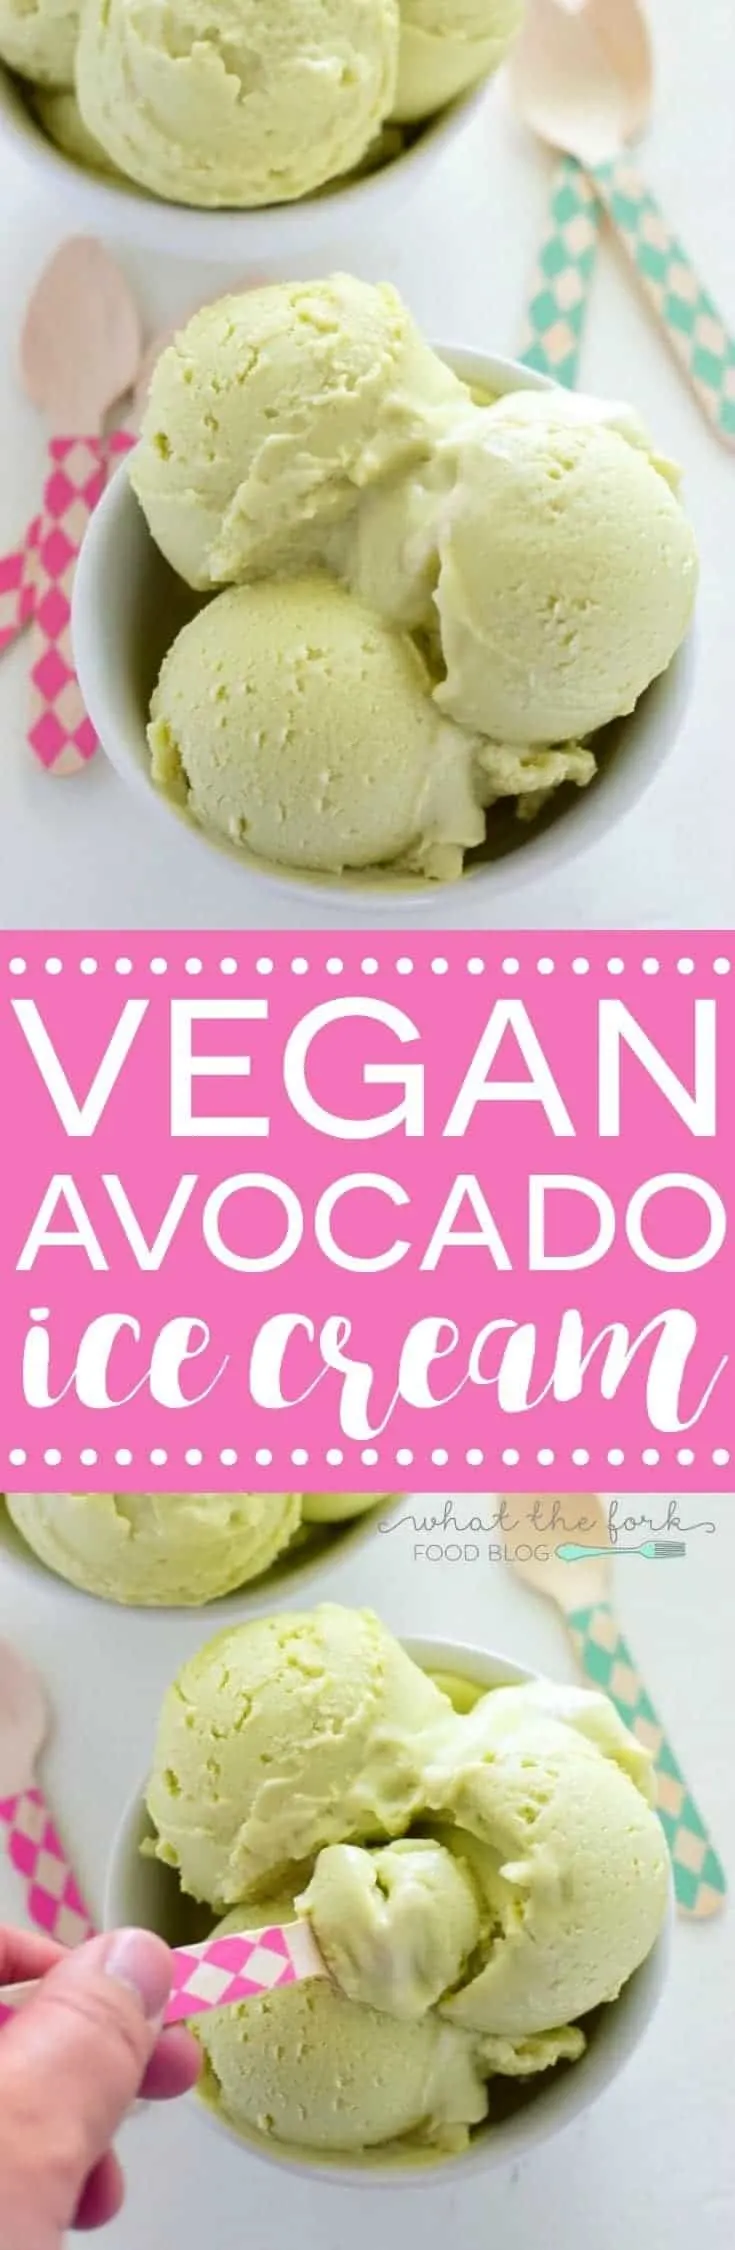 Vegan Avocado Ice Cream (gluten free, egg free, and dairy free) from What The Fork Food Blog | whattheforkfoodblog.com